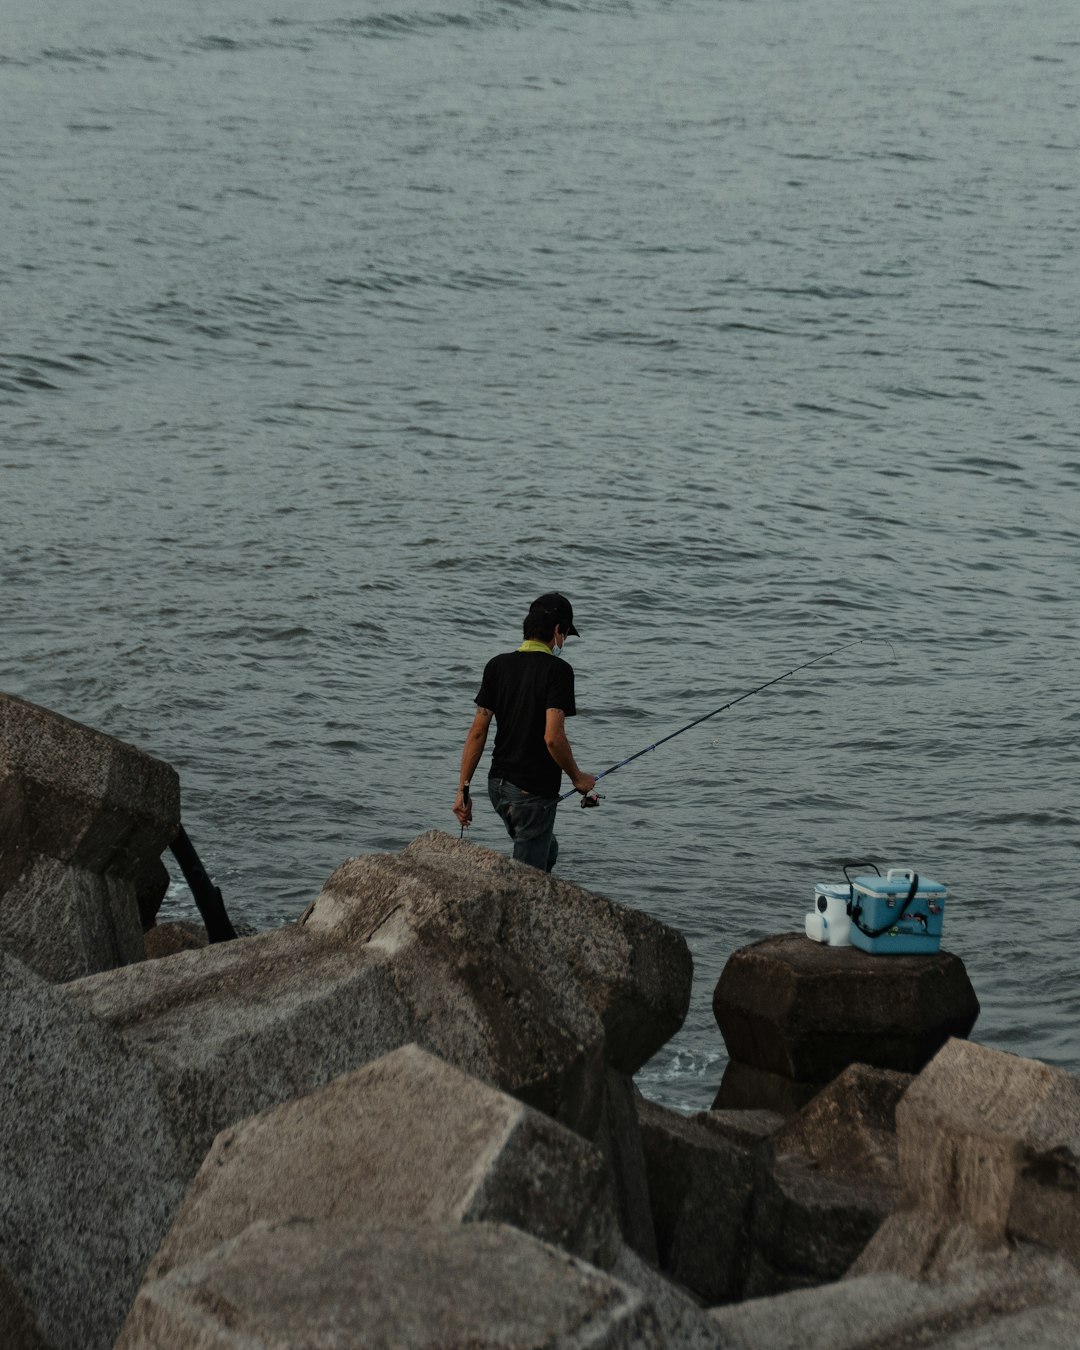 man in black t-shirt and black shorts fishing on sea during daytime